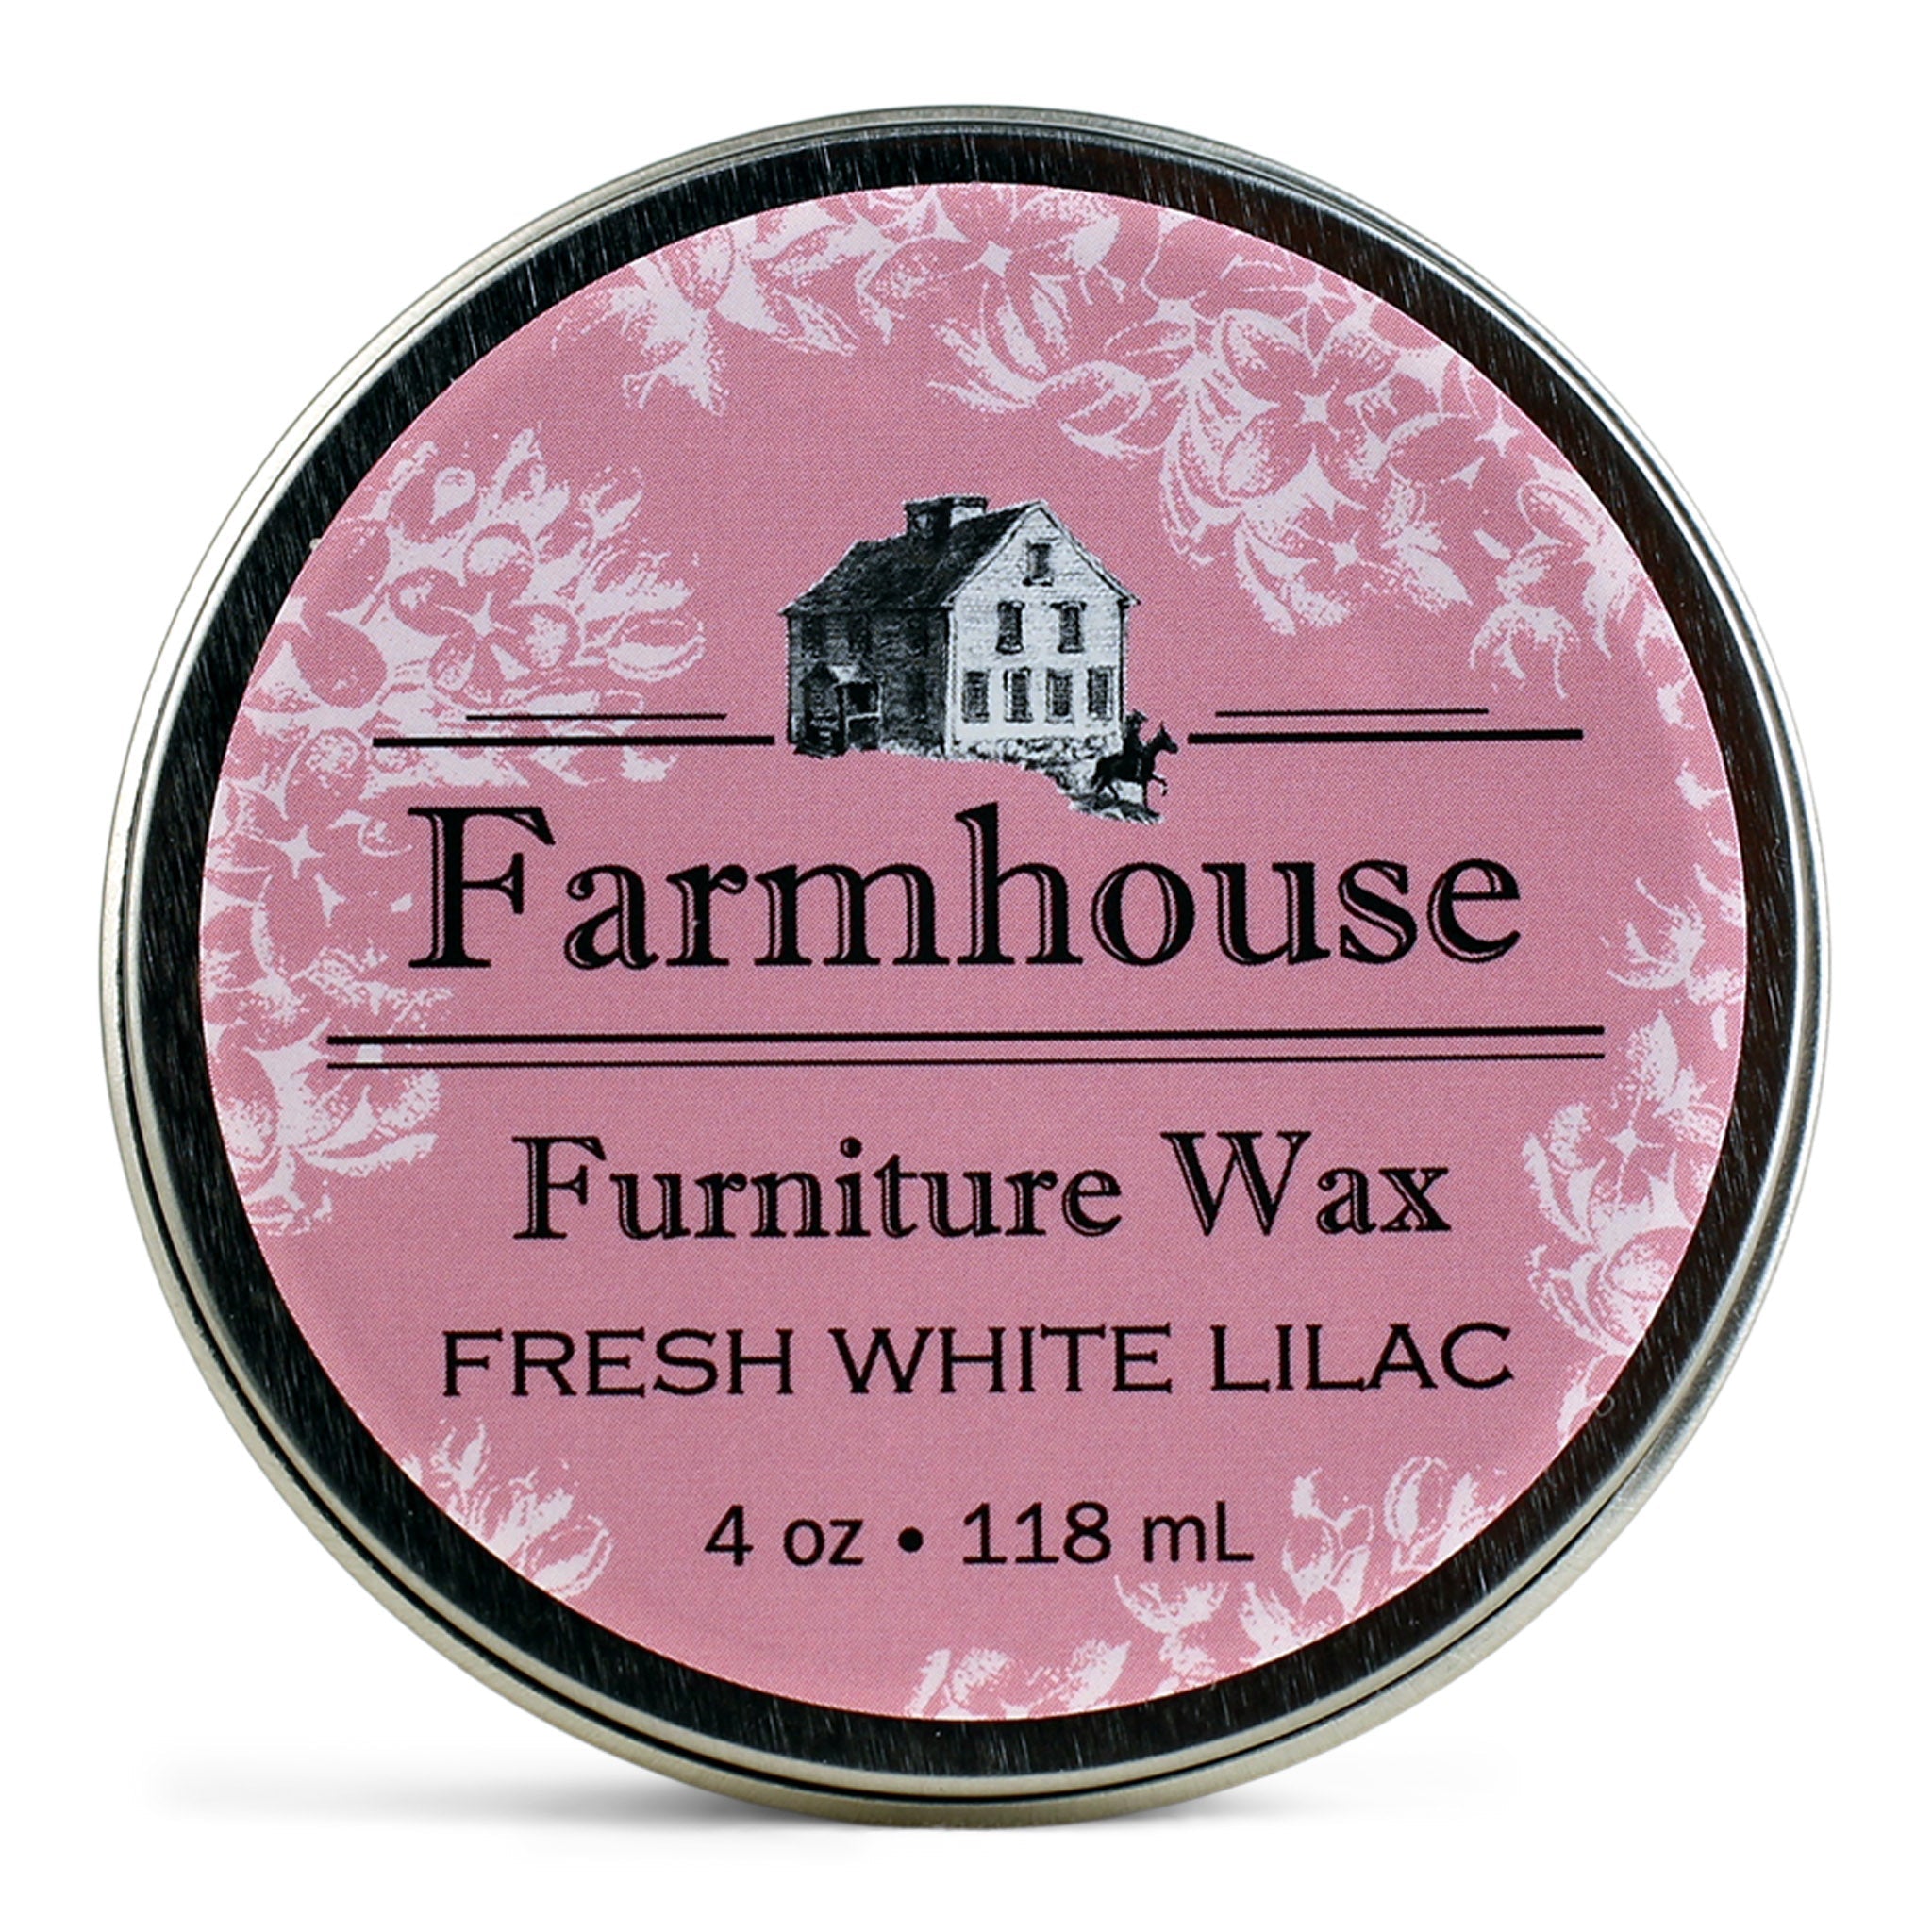 Organic 100% natural pure wood wax for furniture - Infinity Store USA